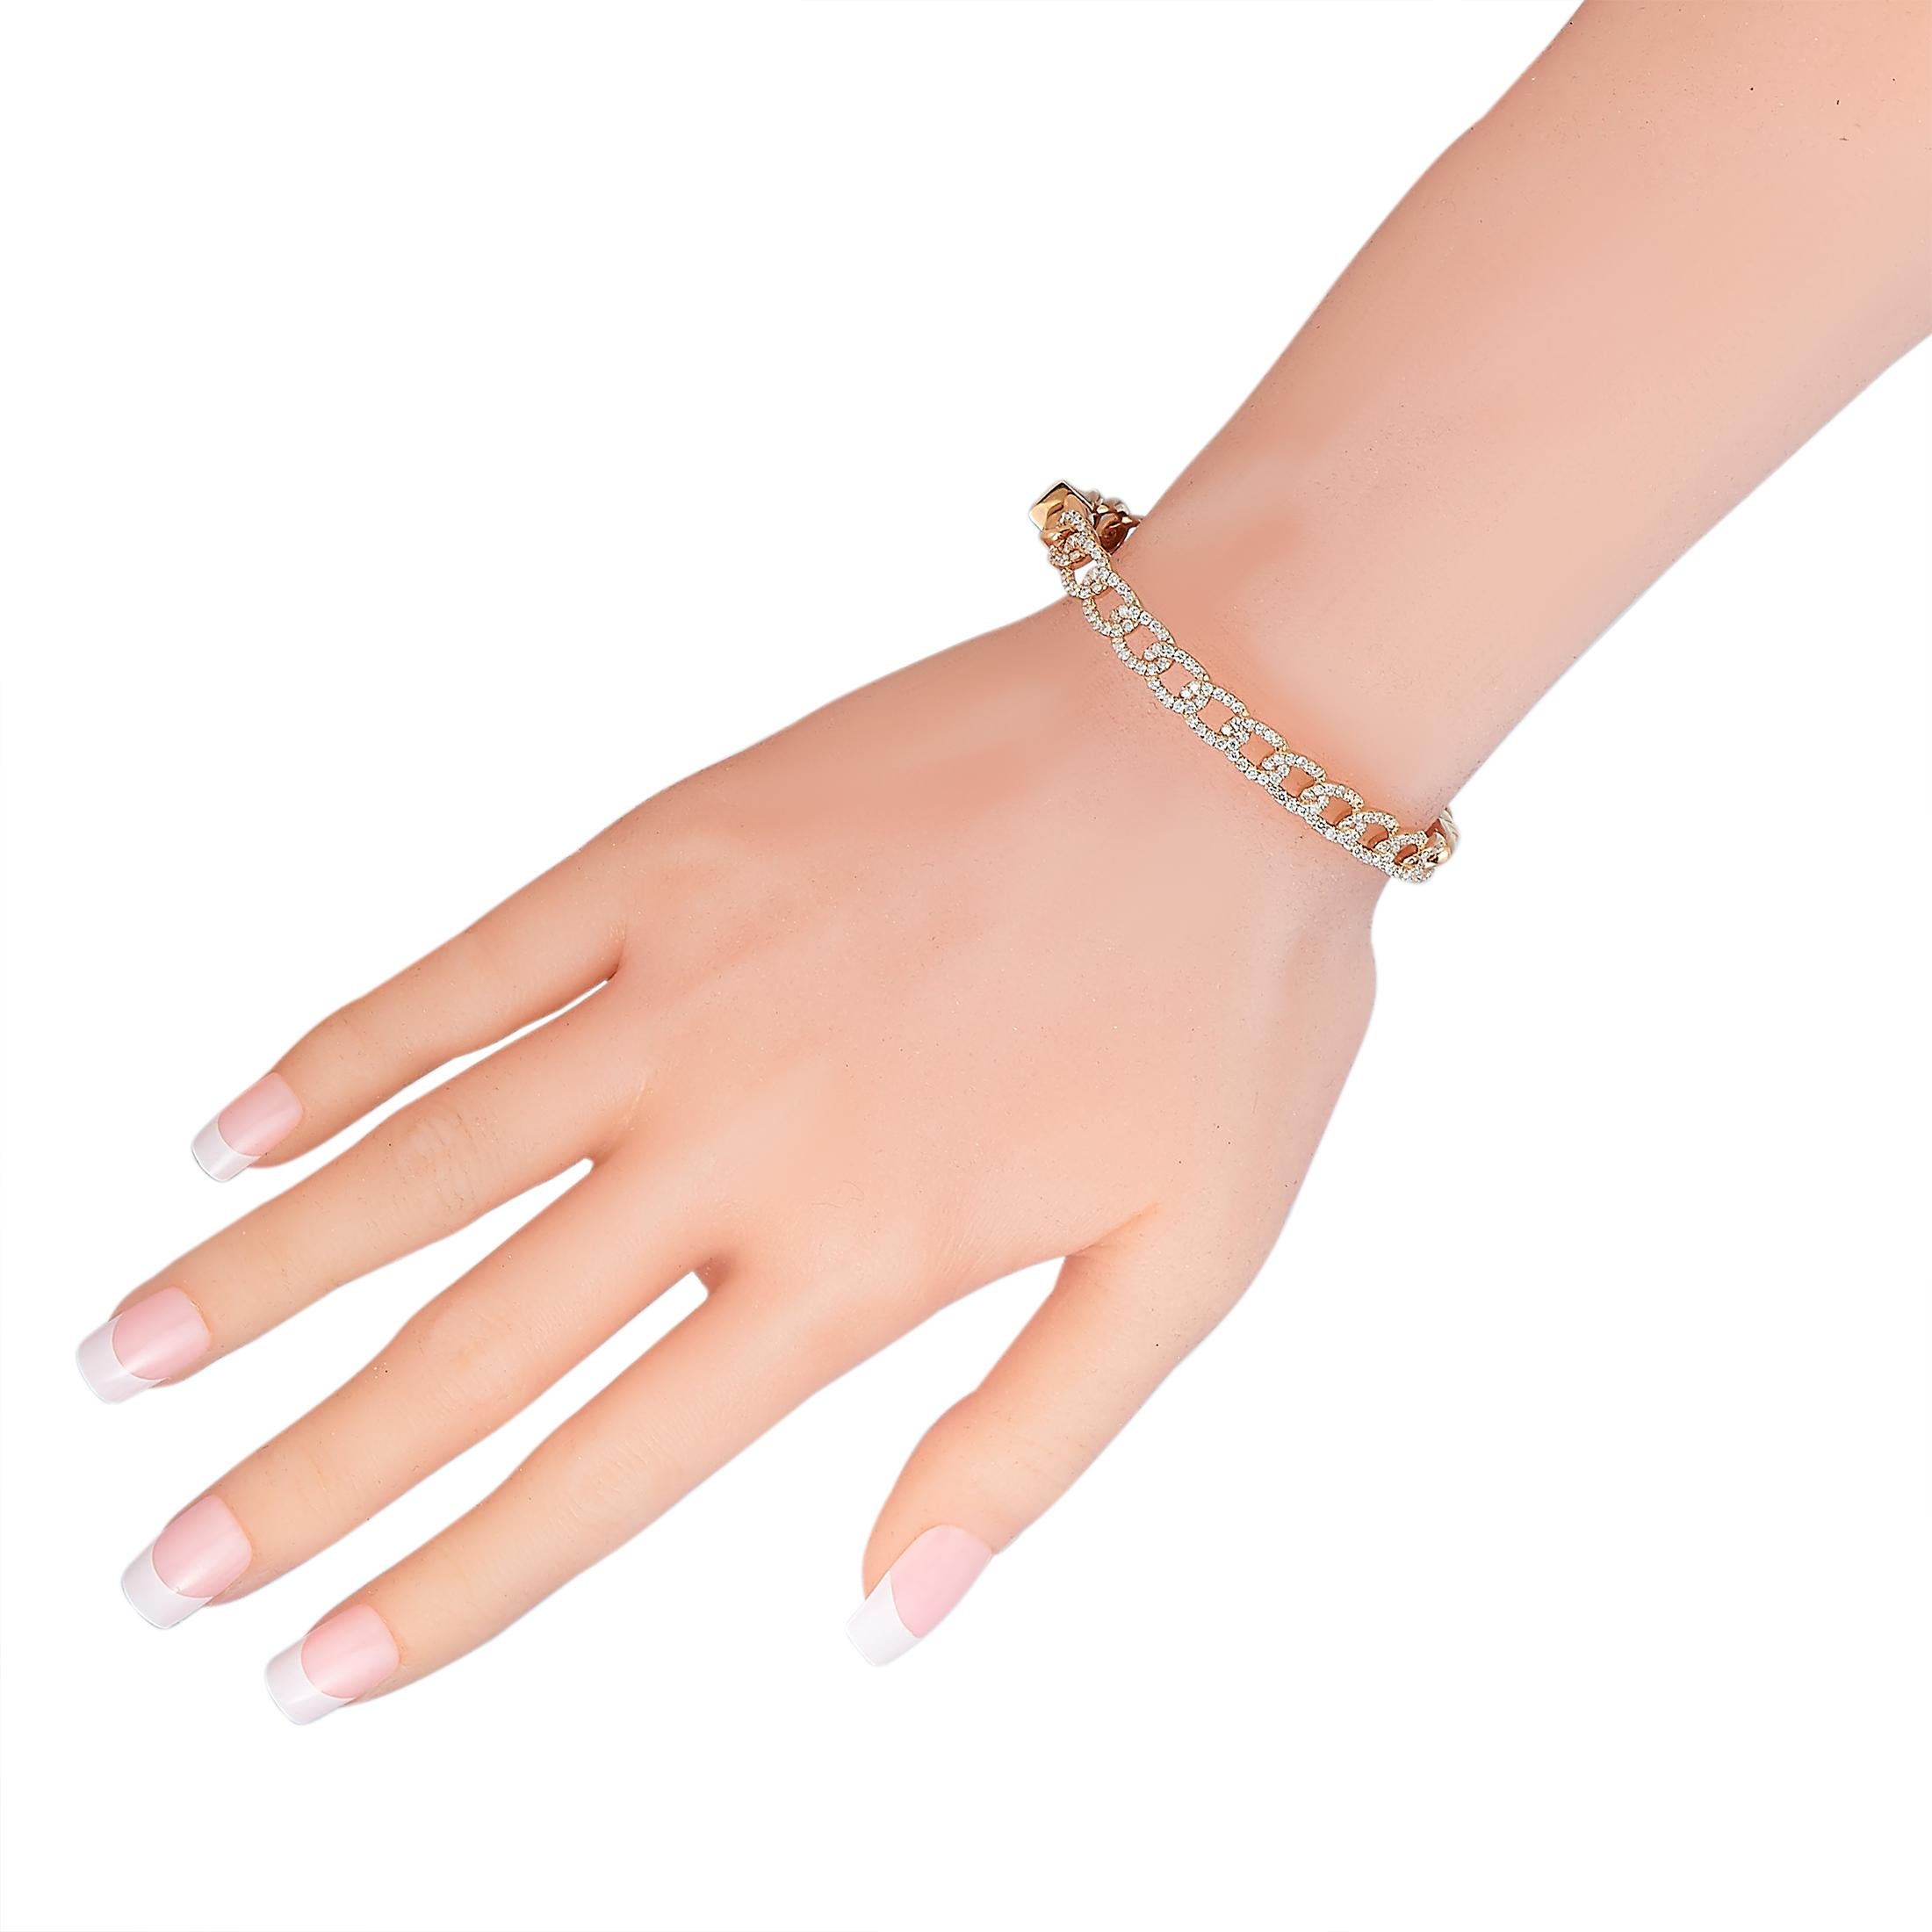 This LB Exclusive bracelet is made of 18K rose gold and set with diamonds that amount to 1.75 carats. The bracelet weighs 20.9 grams and measures 7” in length.

Offered in brand new condition, this jewelry piece includes a gift box.